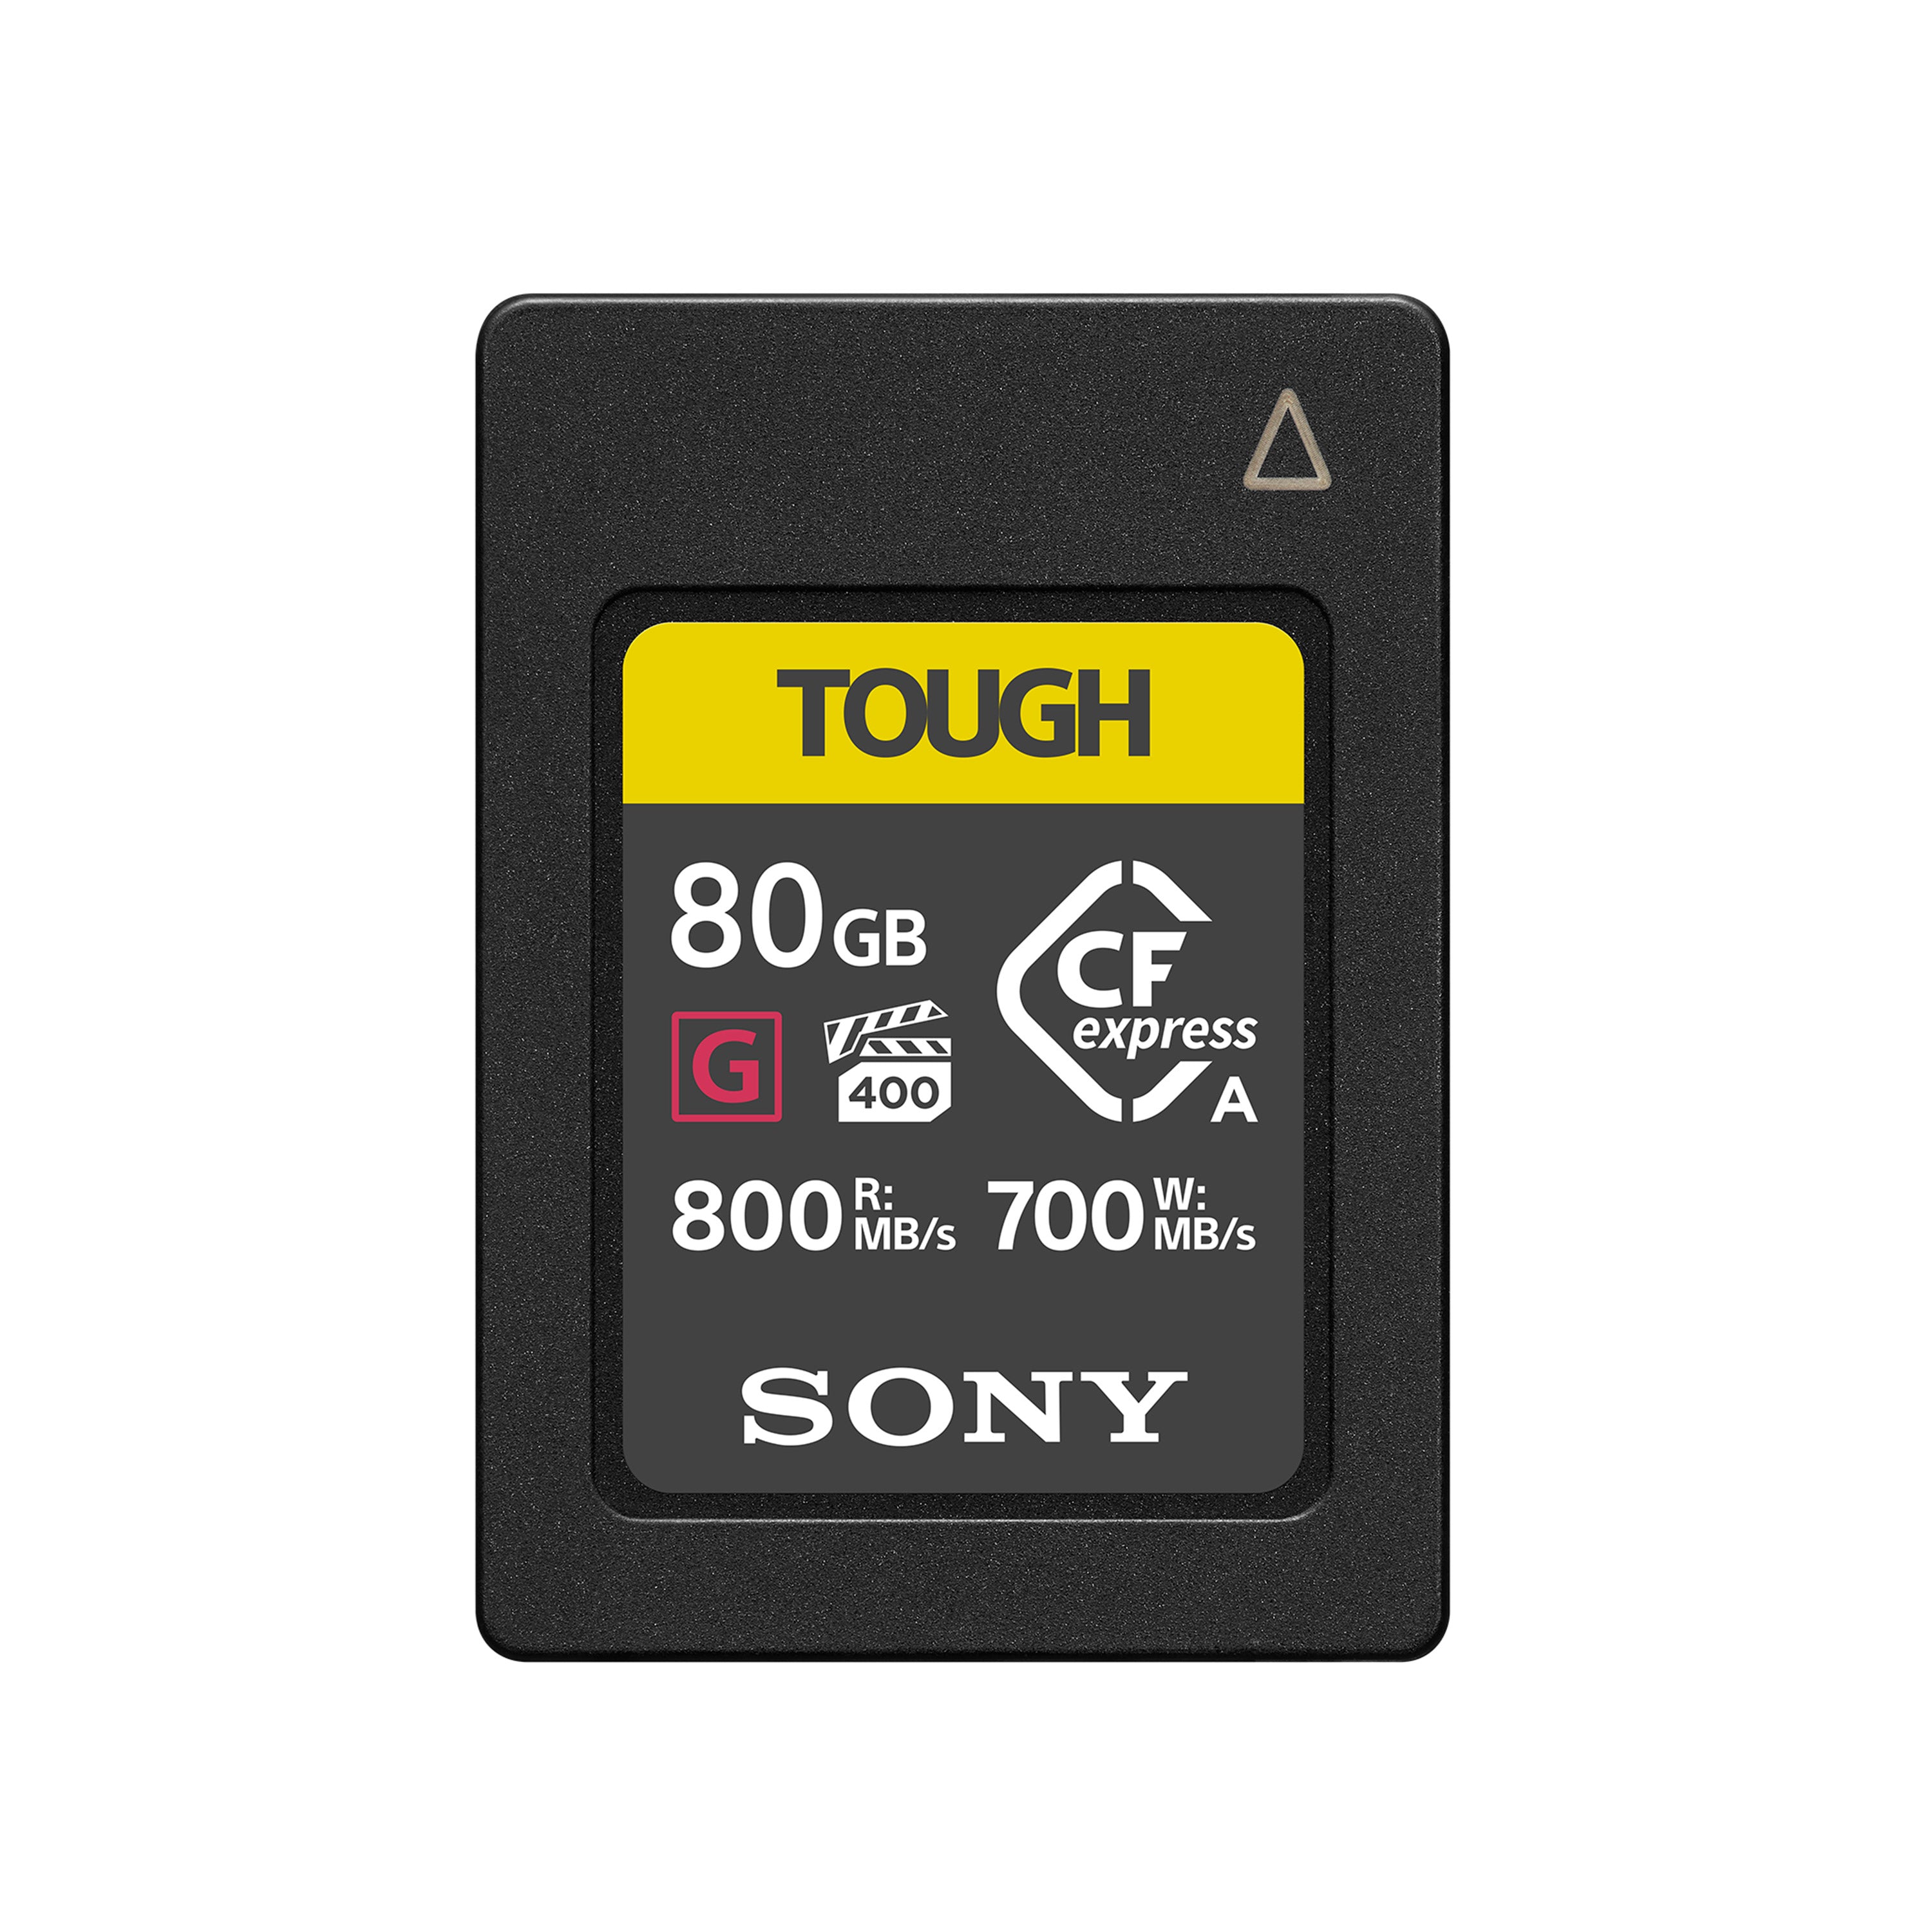 Sony CFexpress Type A G-Series Memory Card - 80GB